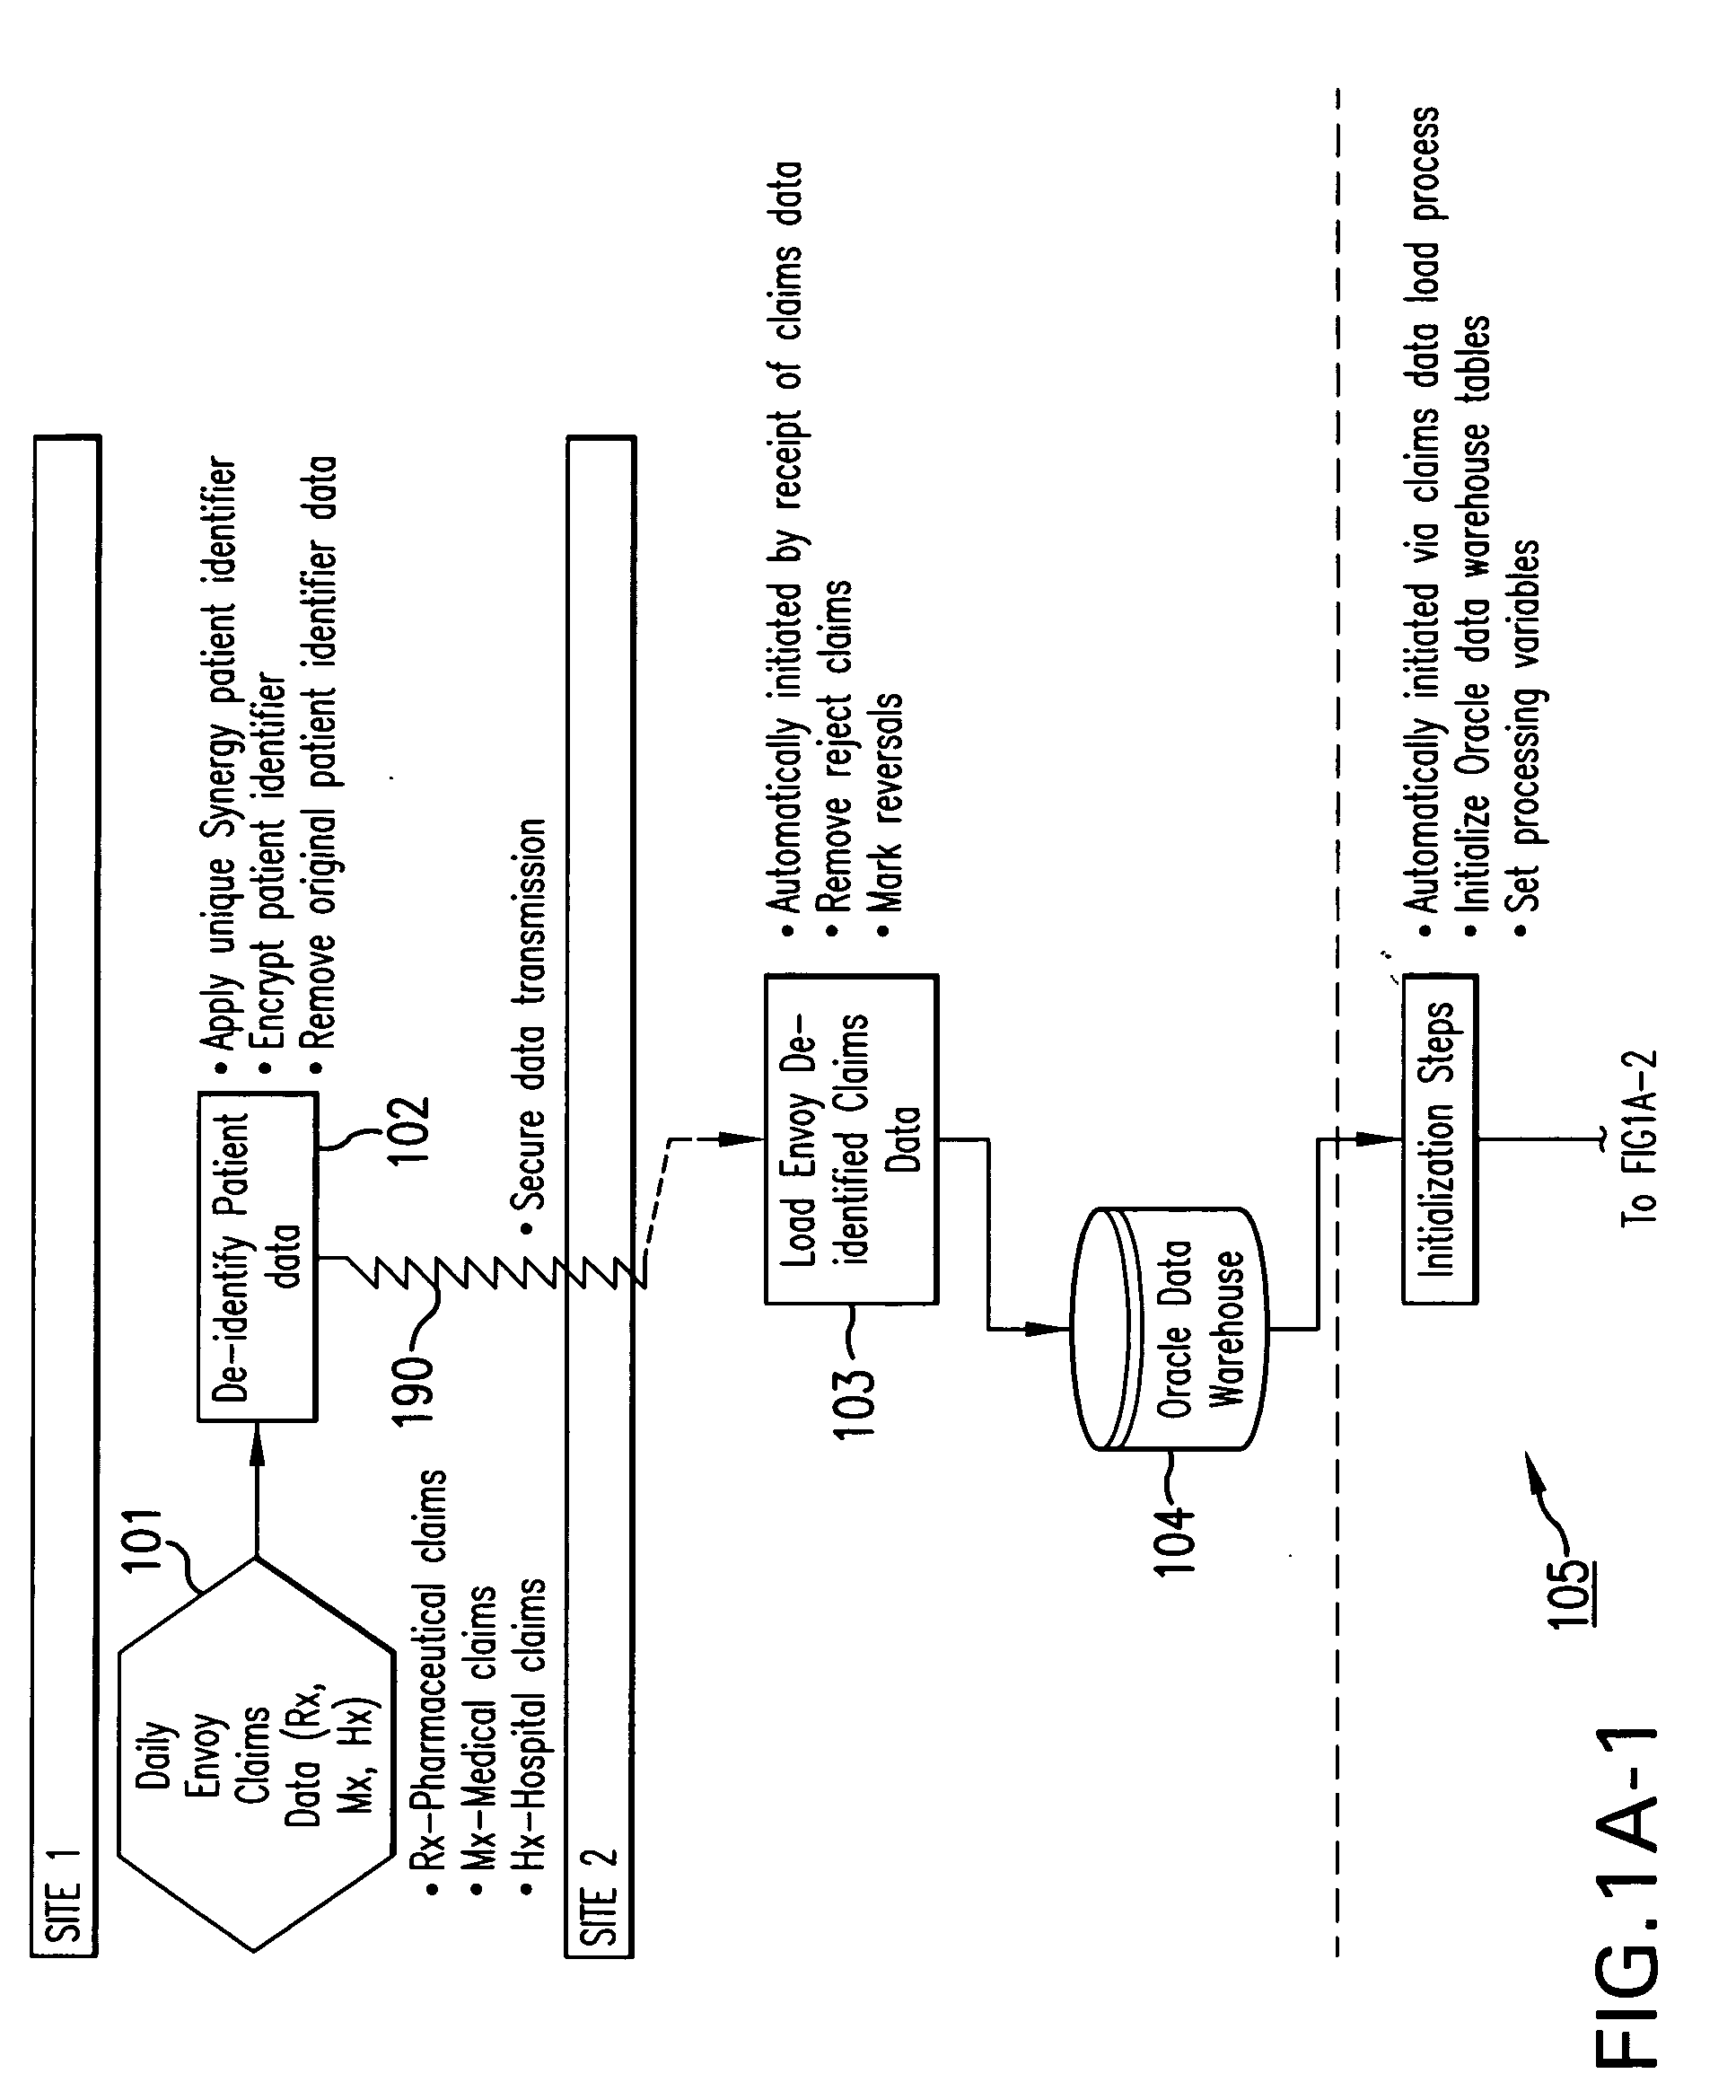 System and method for generating de-identified health care data